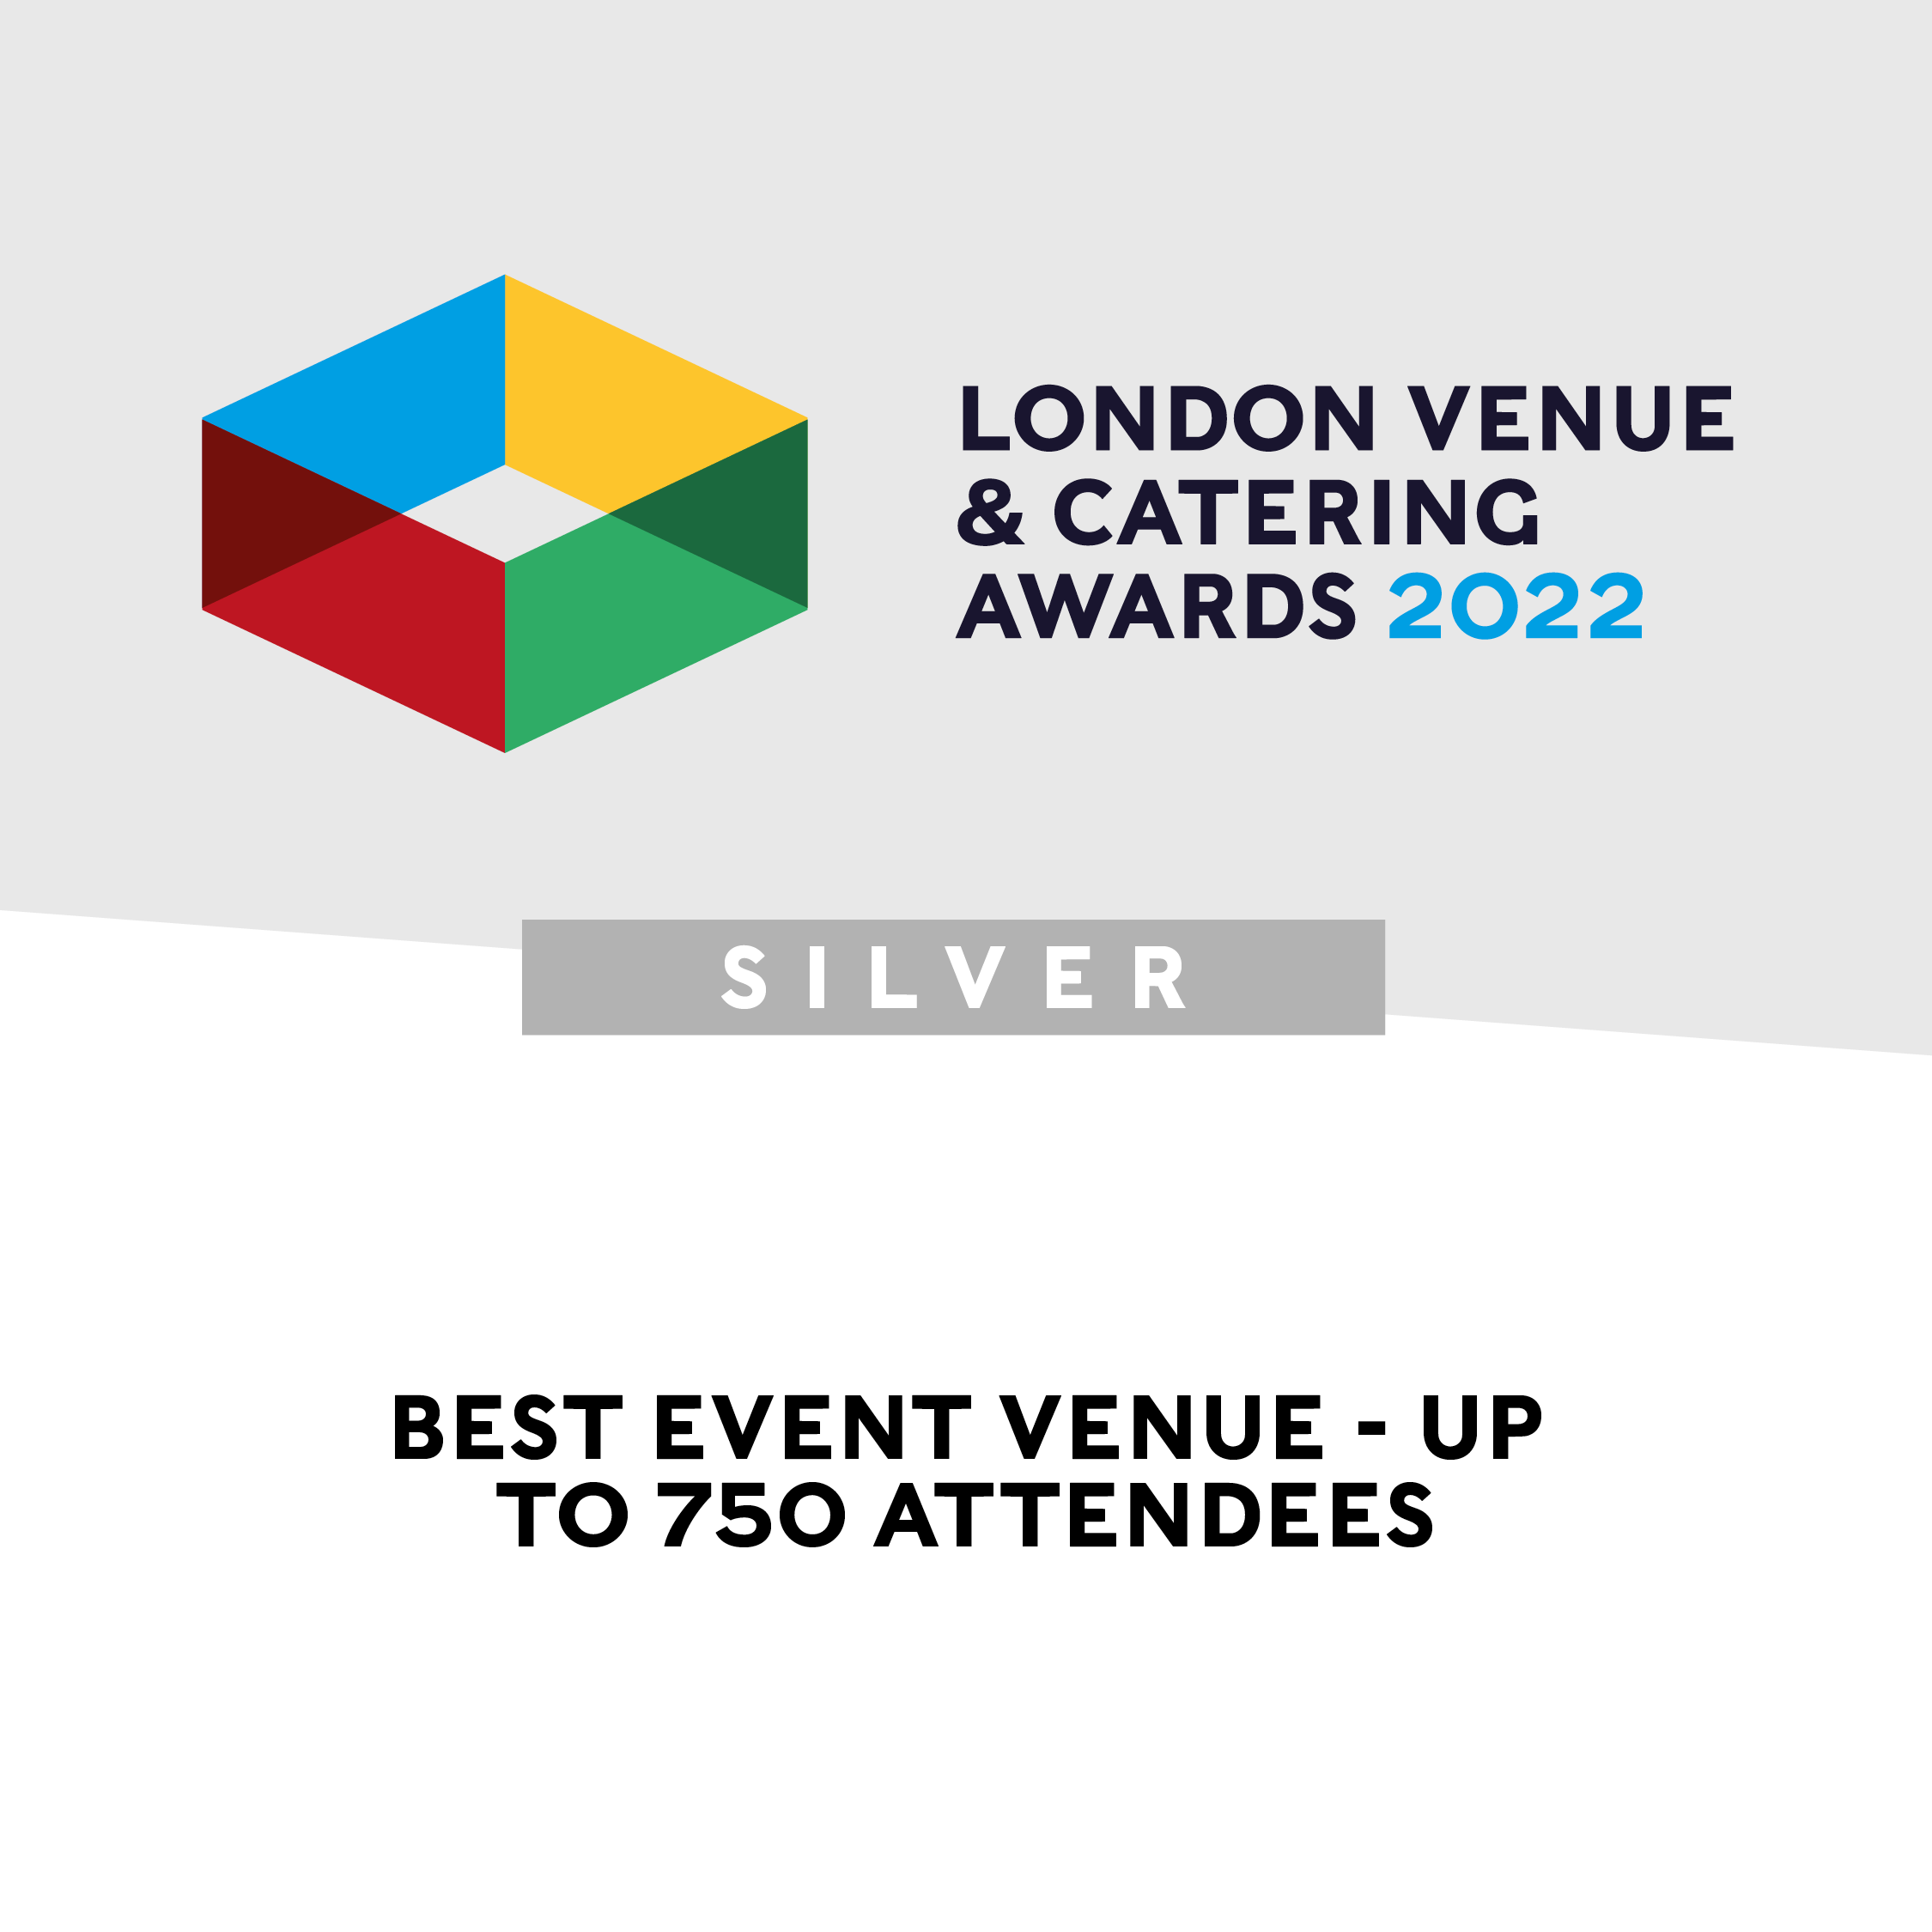 London Venue & Catering Awards 2022 Silver Best Event Venue – Up to 750 Attendees